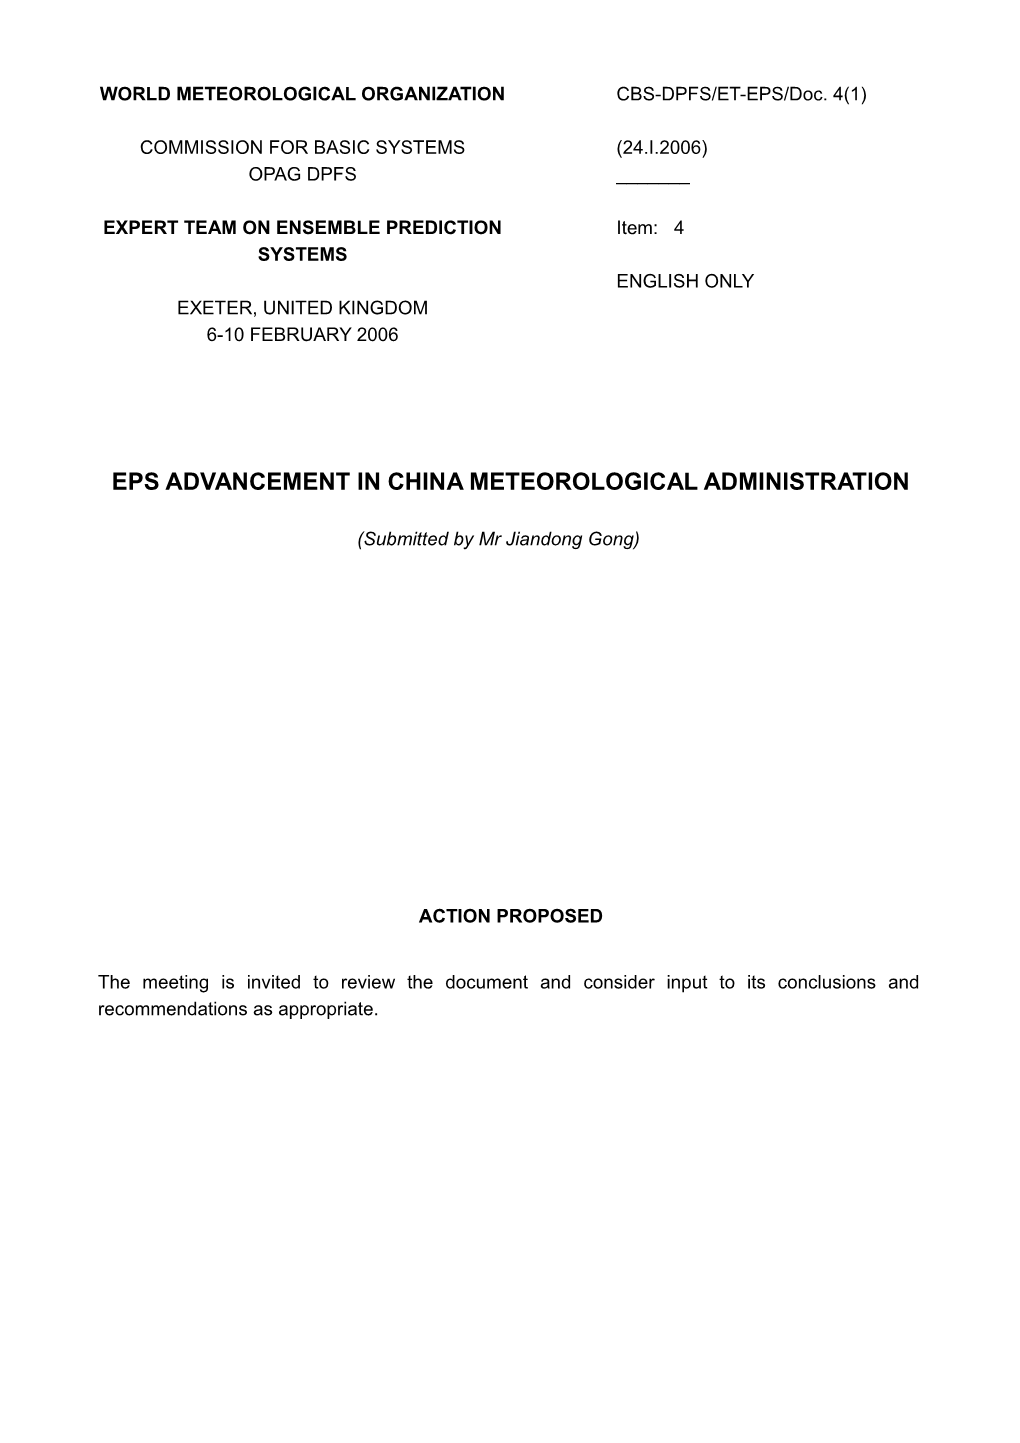 EPS Advancement in China Meteorological Administration